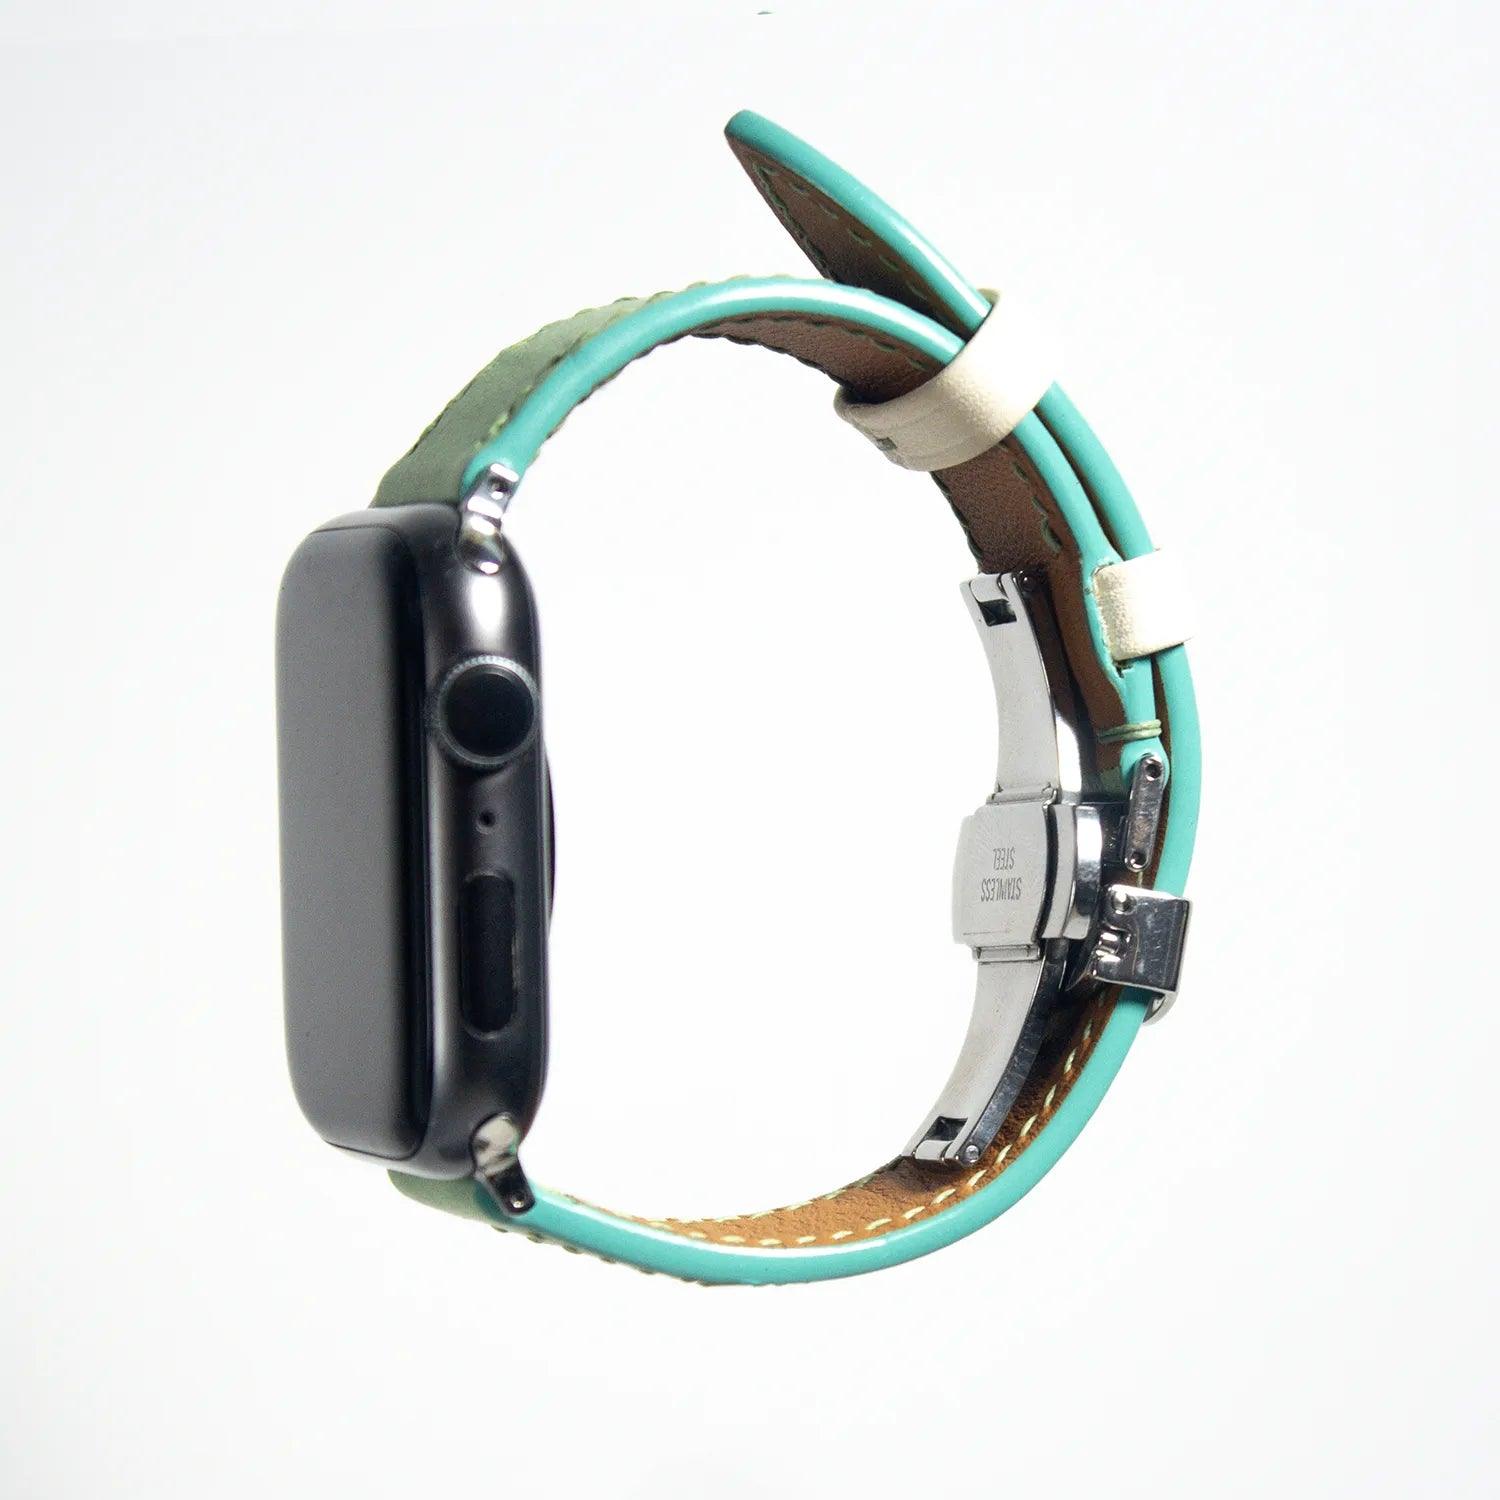 Chic apple watch leather band in mint green Swift leather, perfect for a stylish, vibrant look.